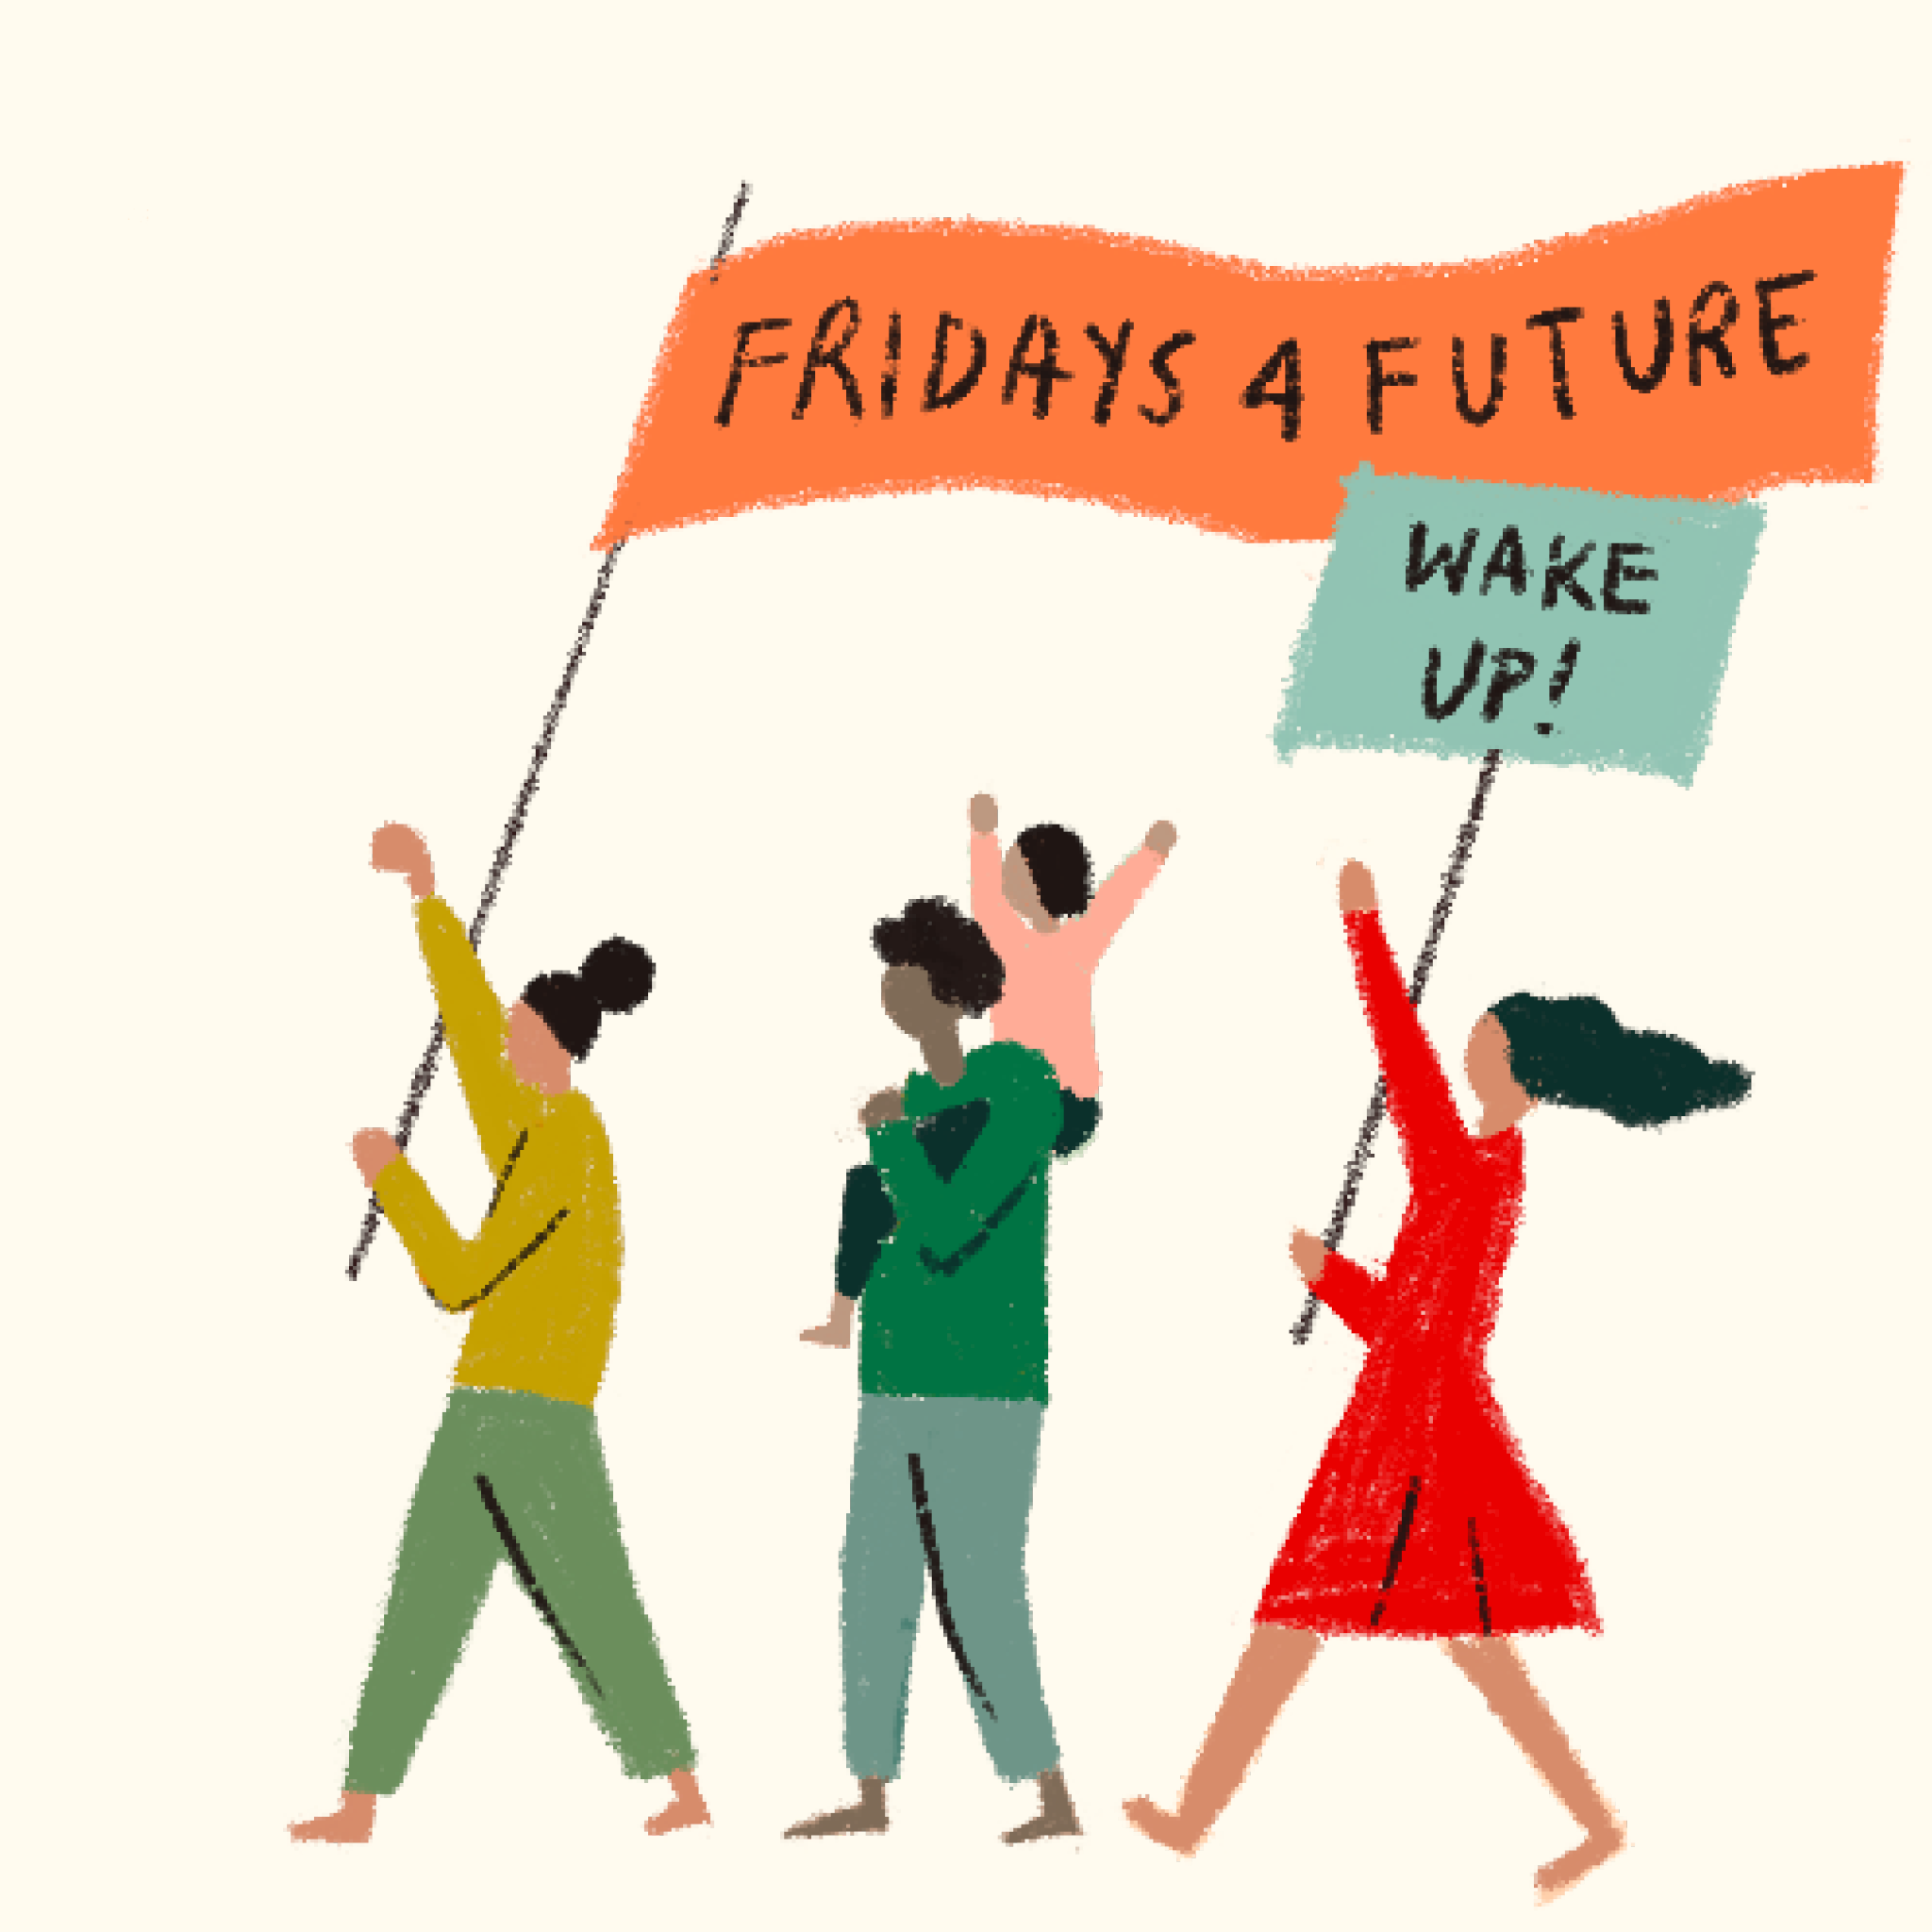 Protestierende "Fridays for Future"